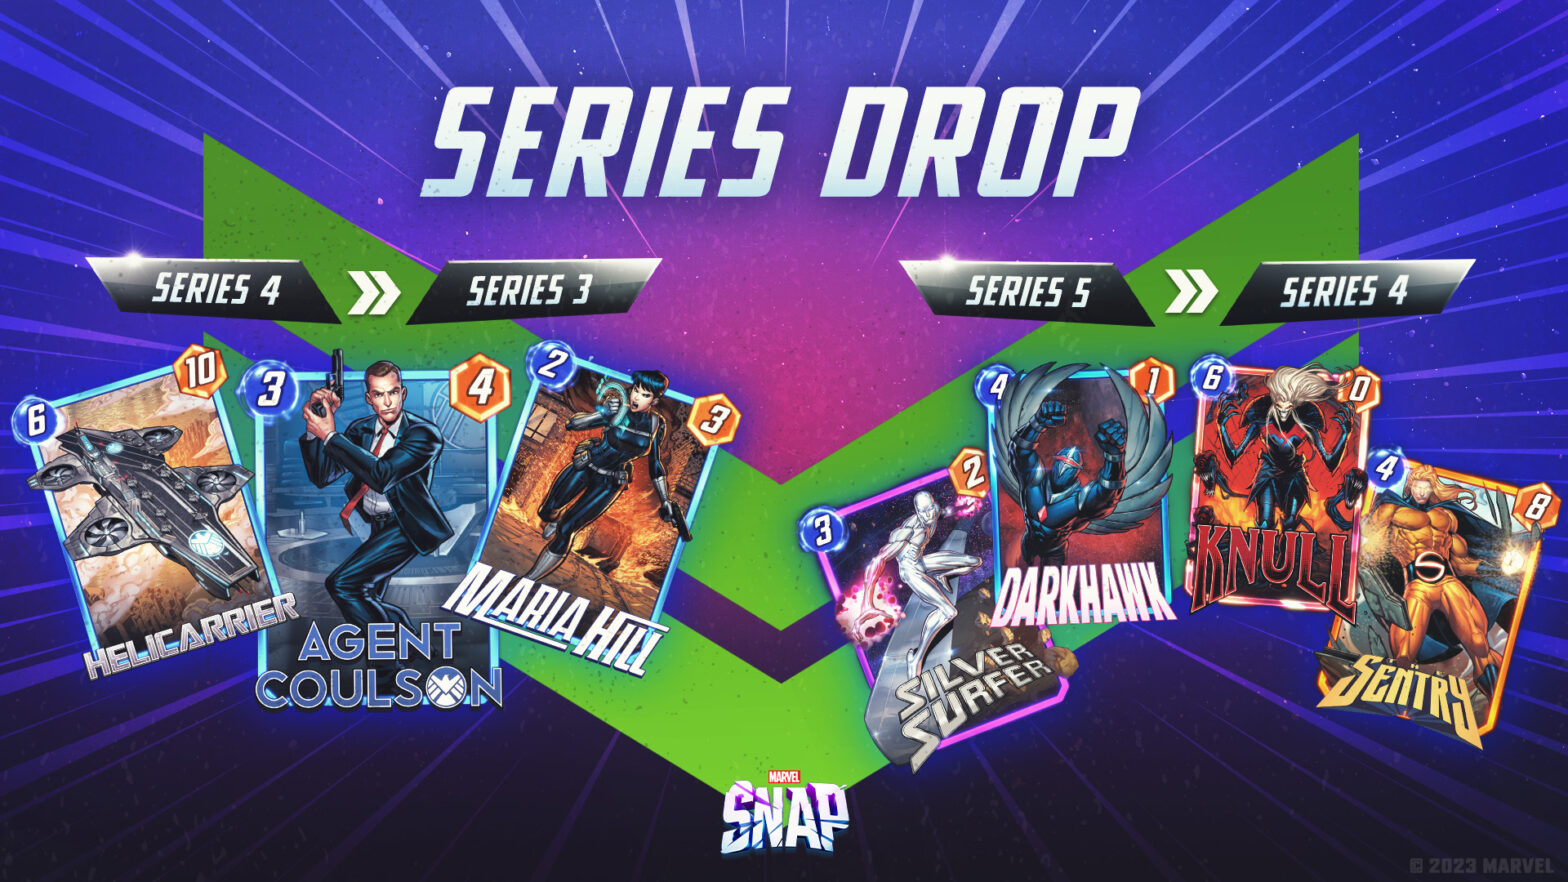 Marvel Snap Player Becomes The First To Hit Max Collection Level